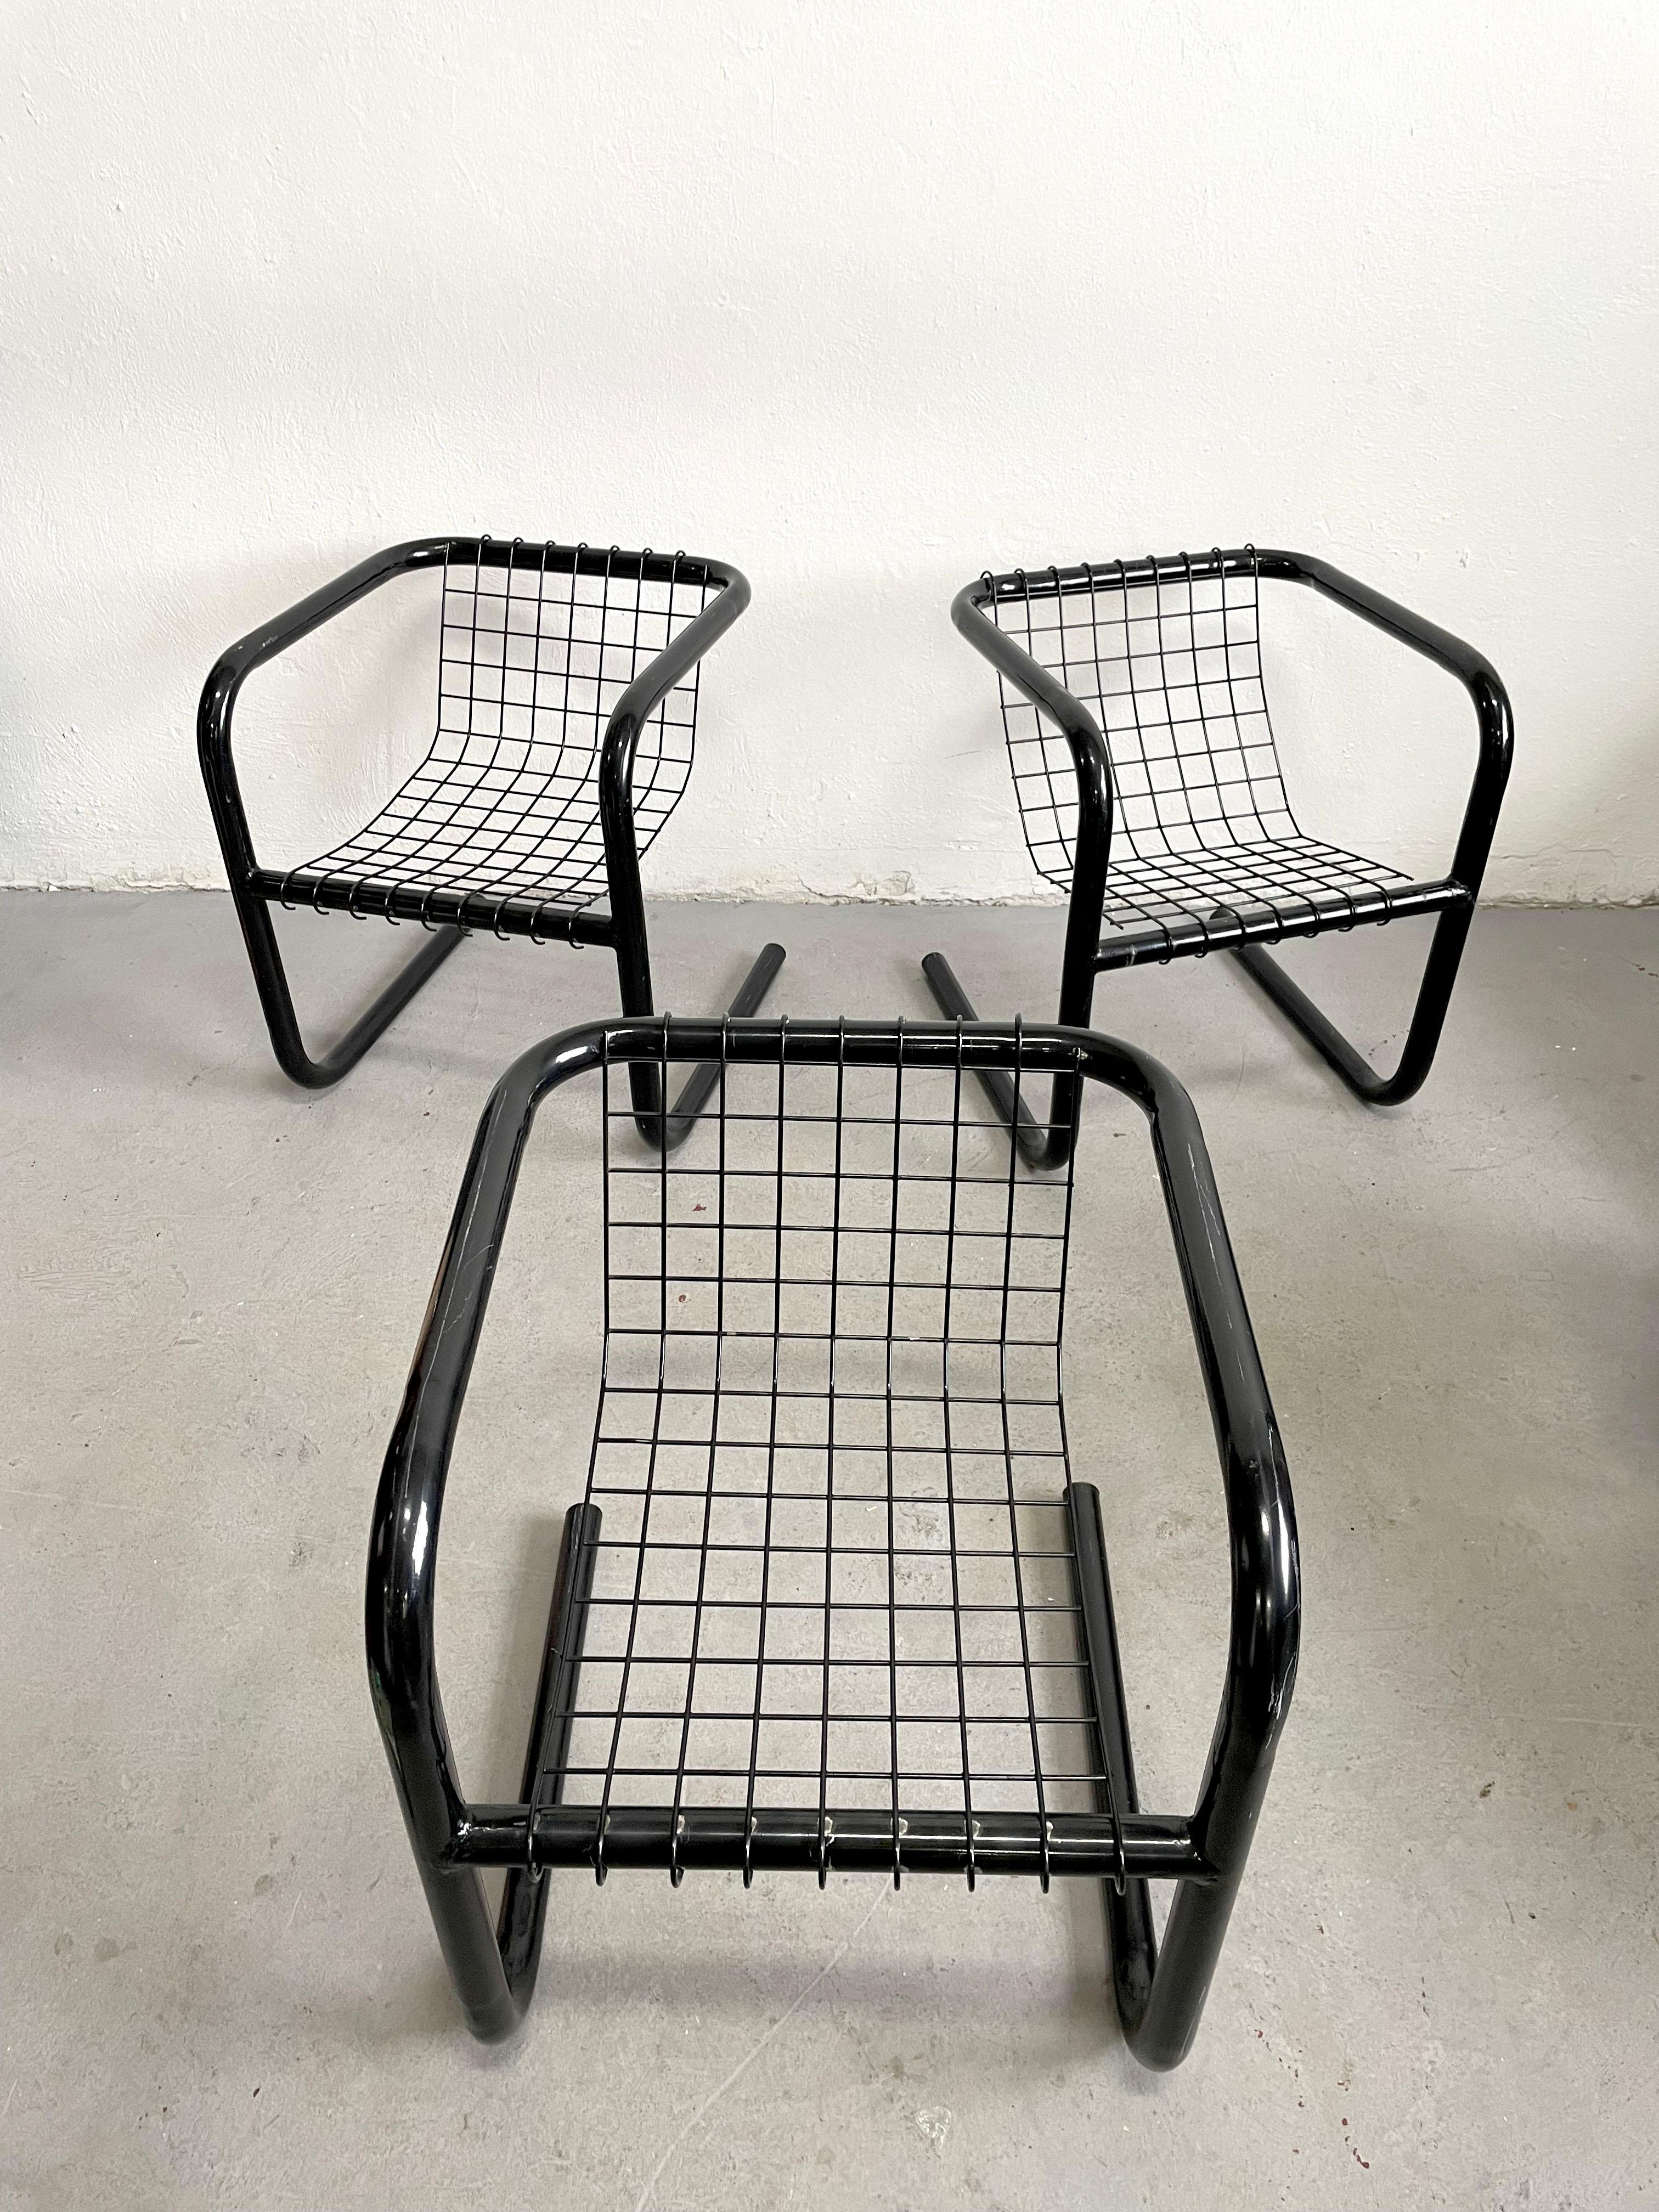 Vintage powder coated metal chair in black color. Cantilever for of the frame supports a removable mesh wire seat

Price is per chair, 3 available.

Modernist design from the 1970s, unknown manufacturer, in style of IKEA.

The chairs have some